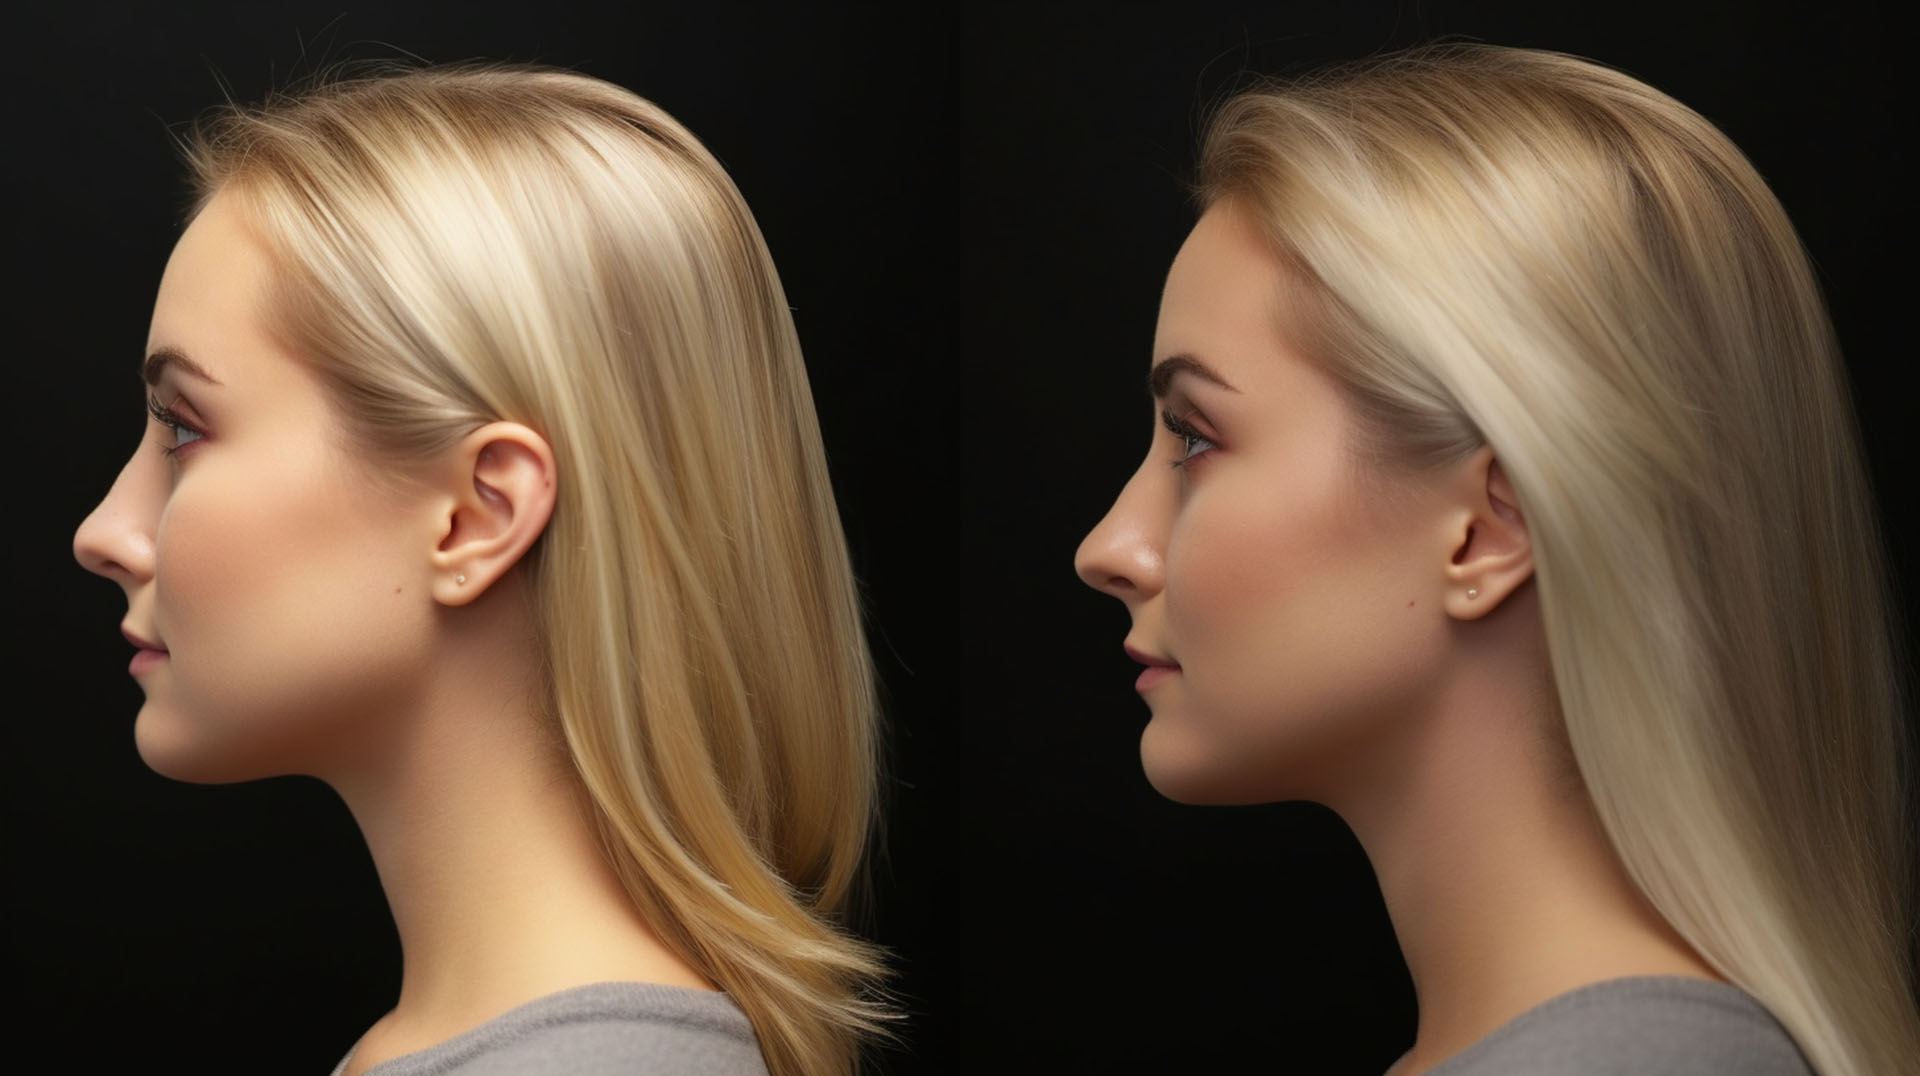 Rhinoplasty Before and After Photo Simcoe